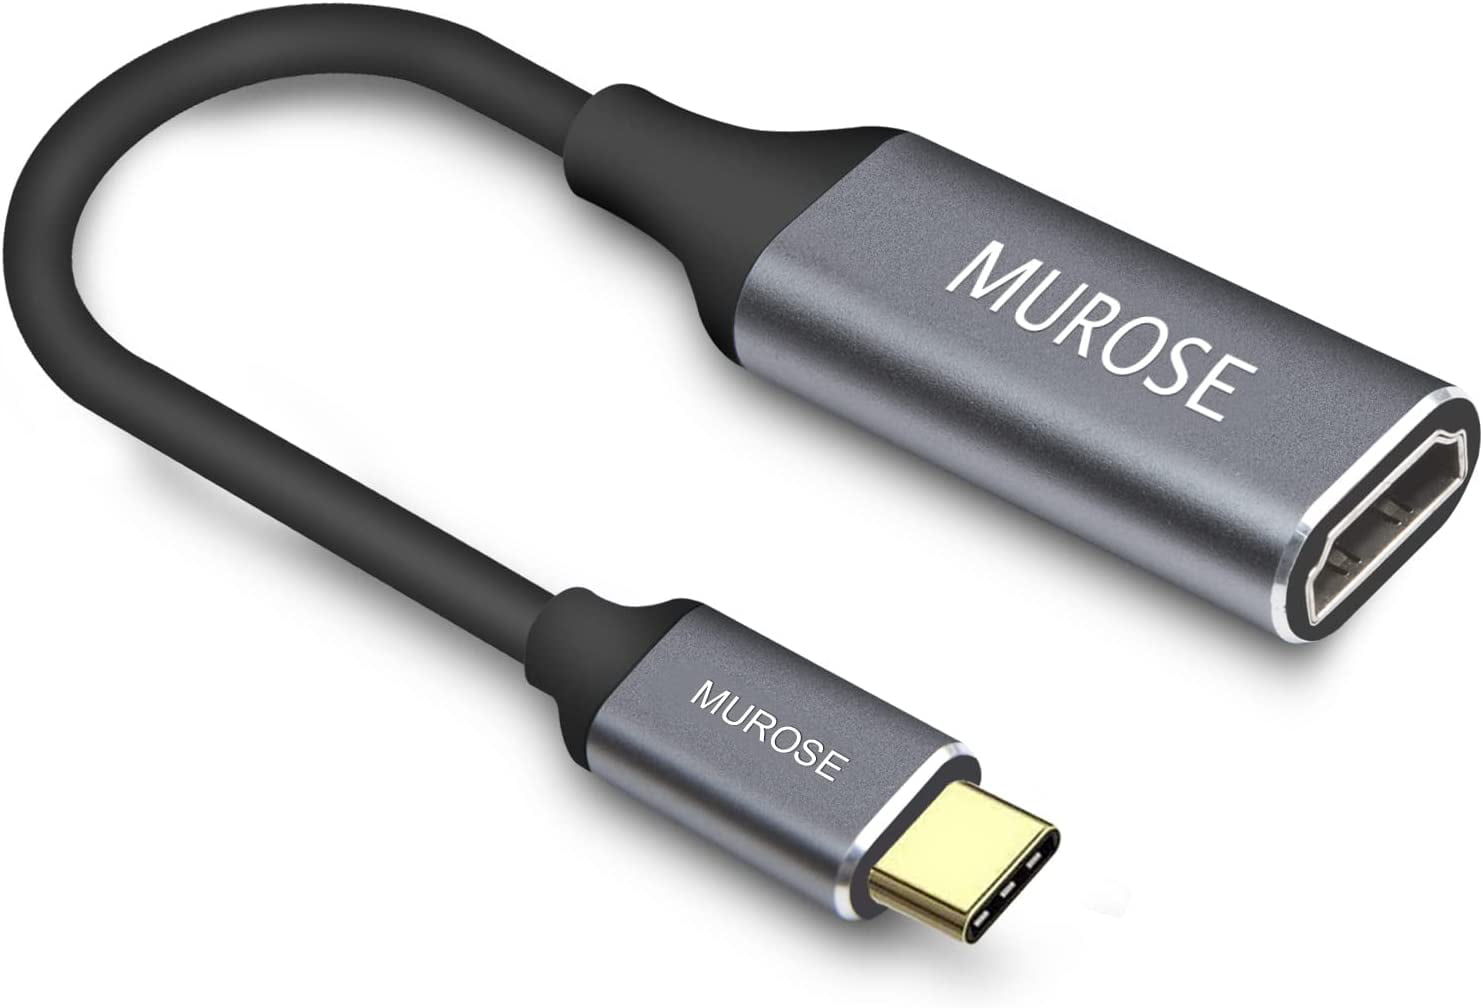 USB C to HDMI Adapter Type-C Male to HDMI Female Adapter,10Gbp/s Speed Thunderbolt 3/4 HDMI - Walmart.com